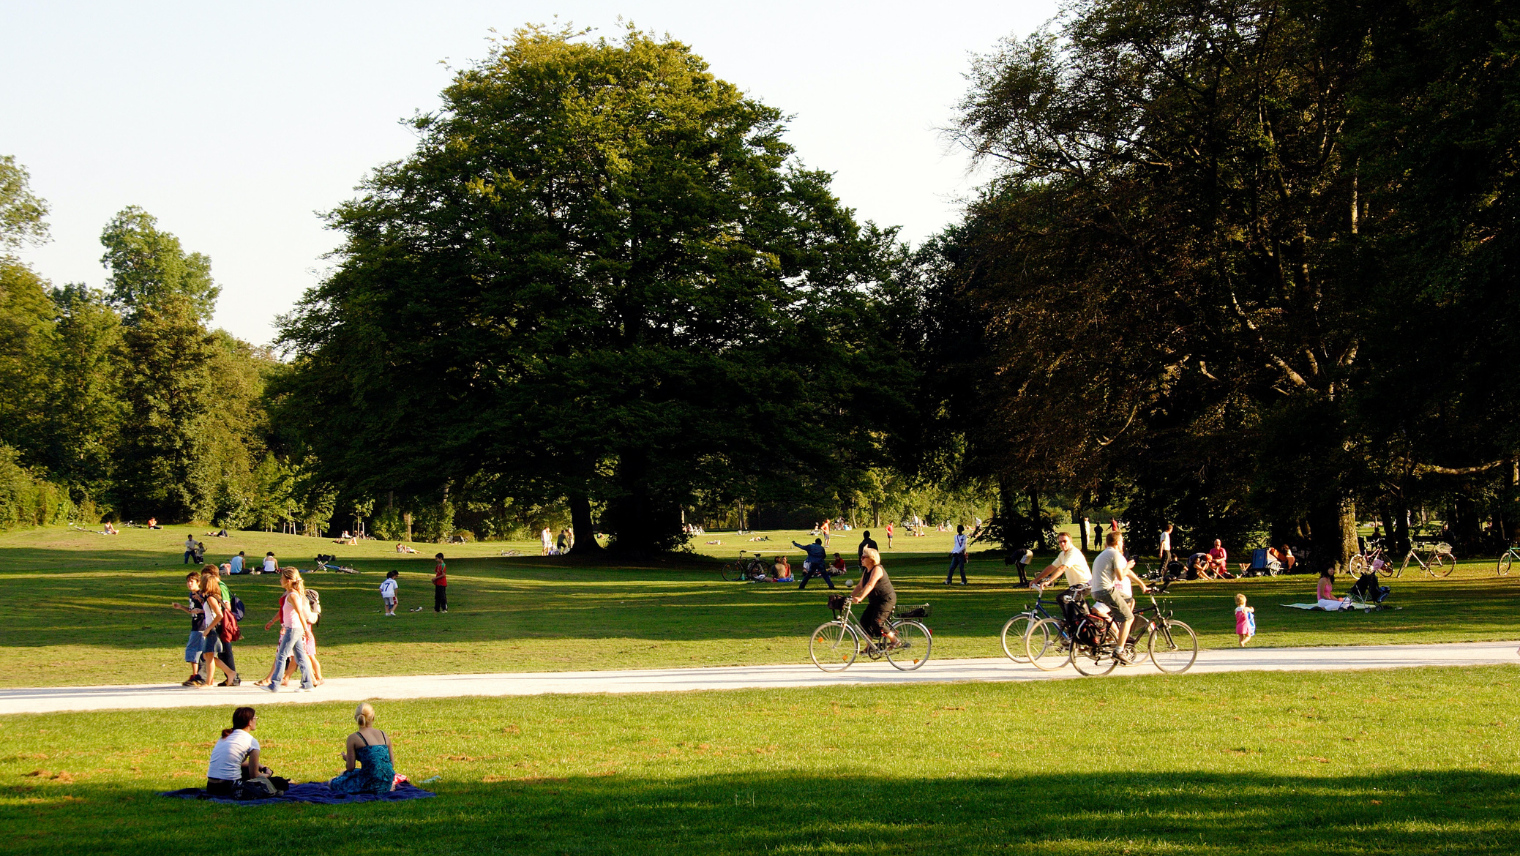 An image of people at a park in the summer